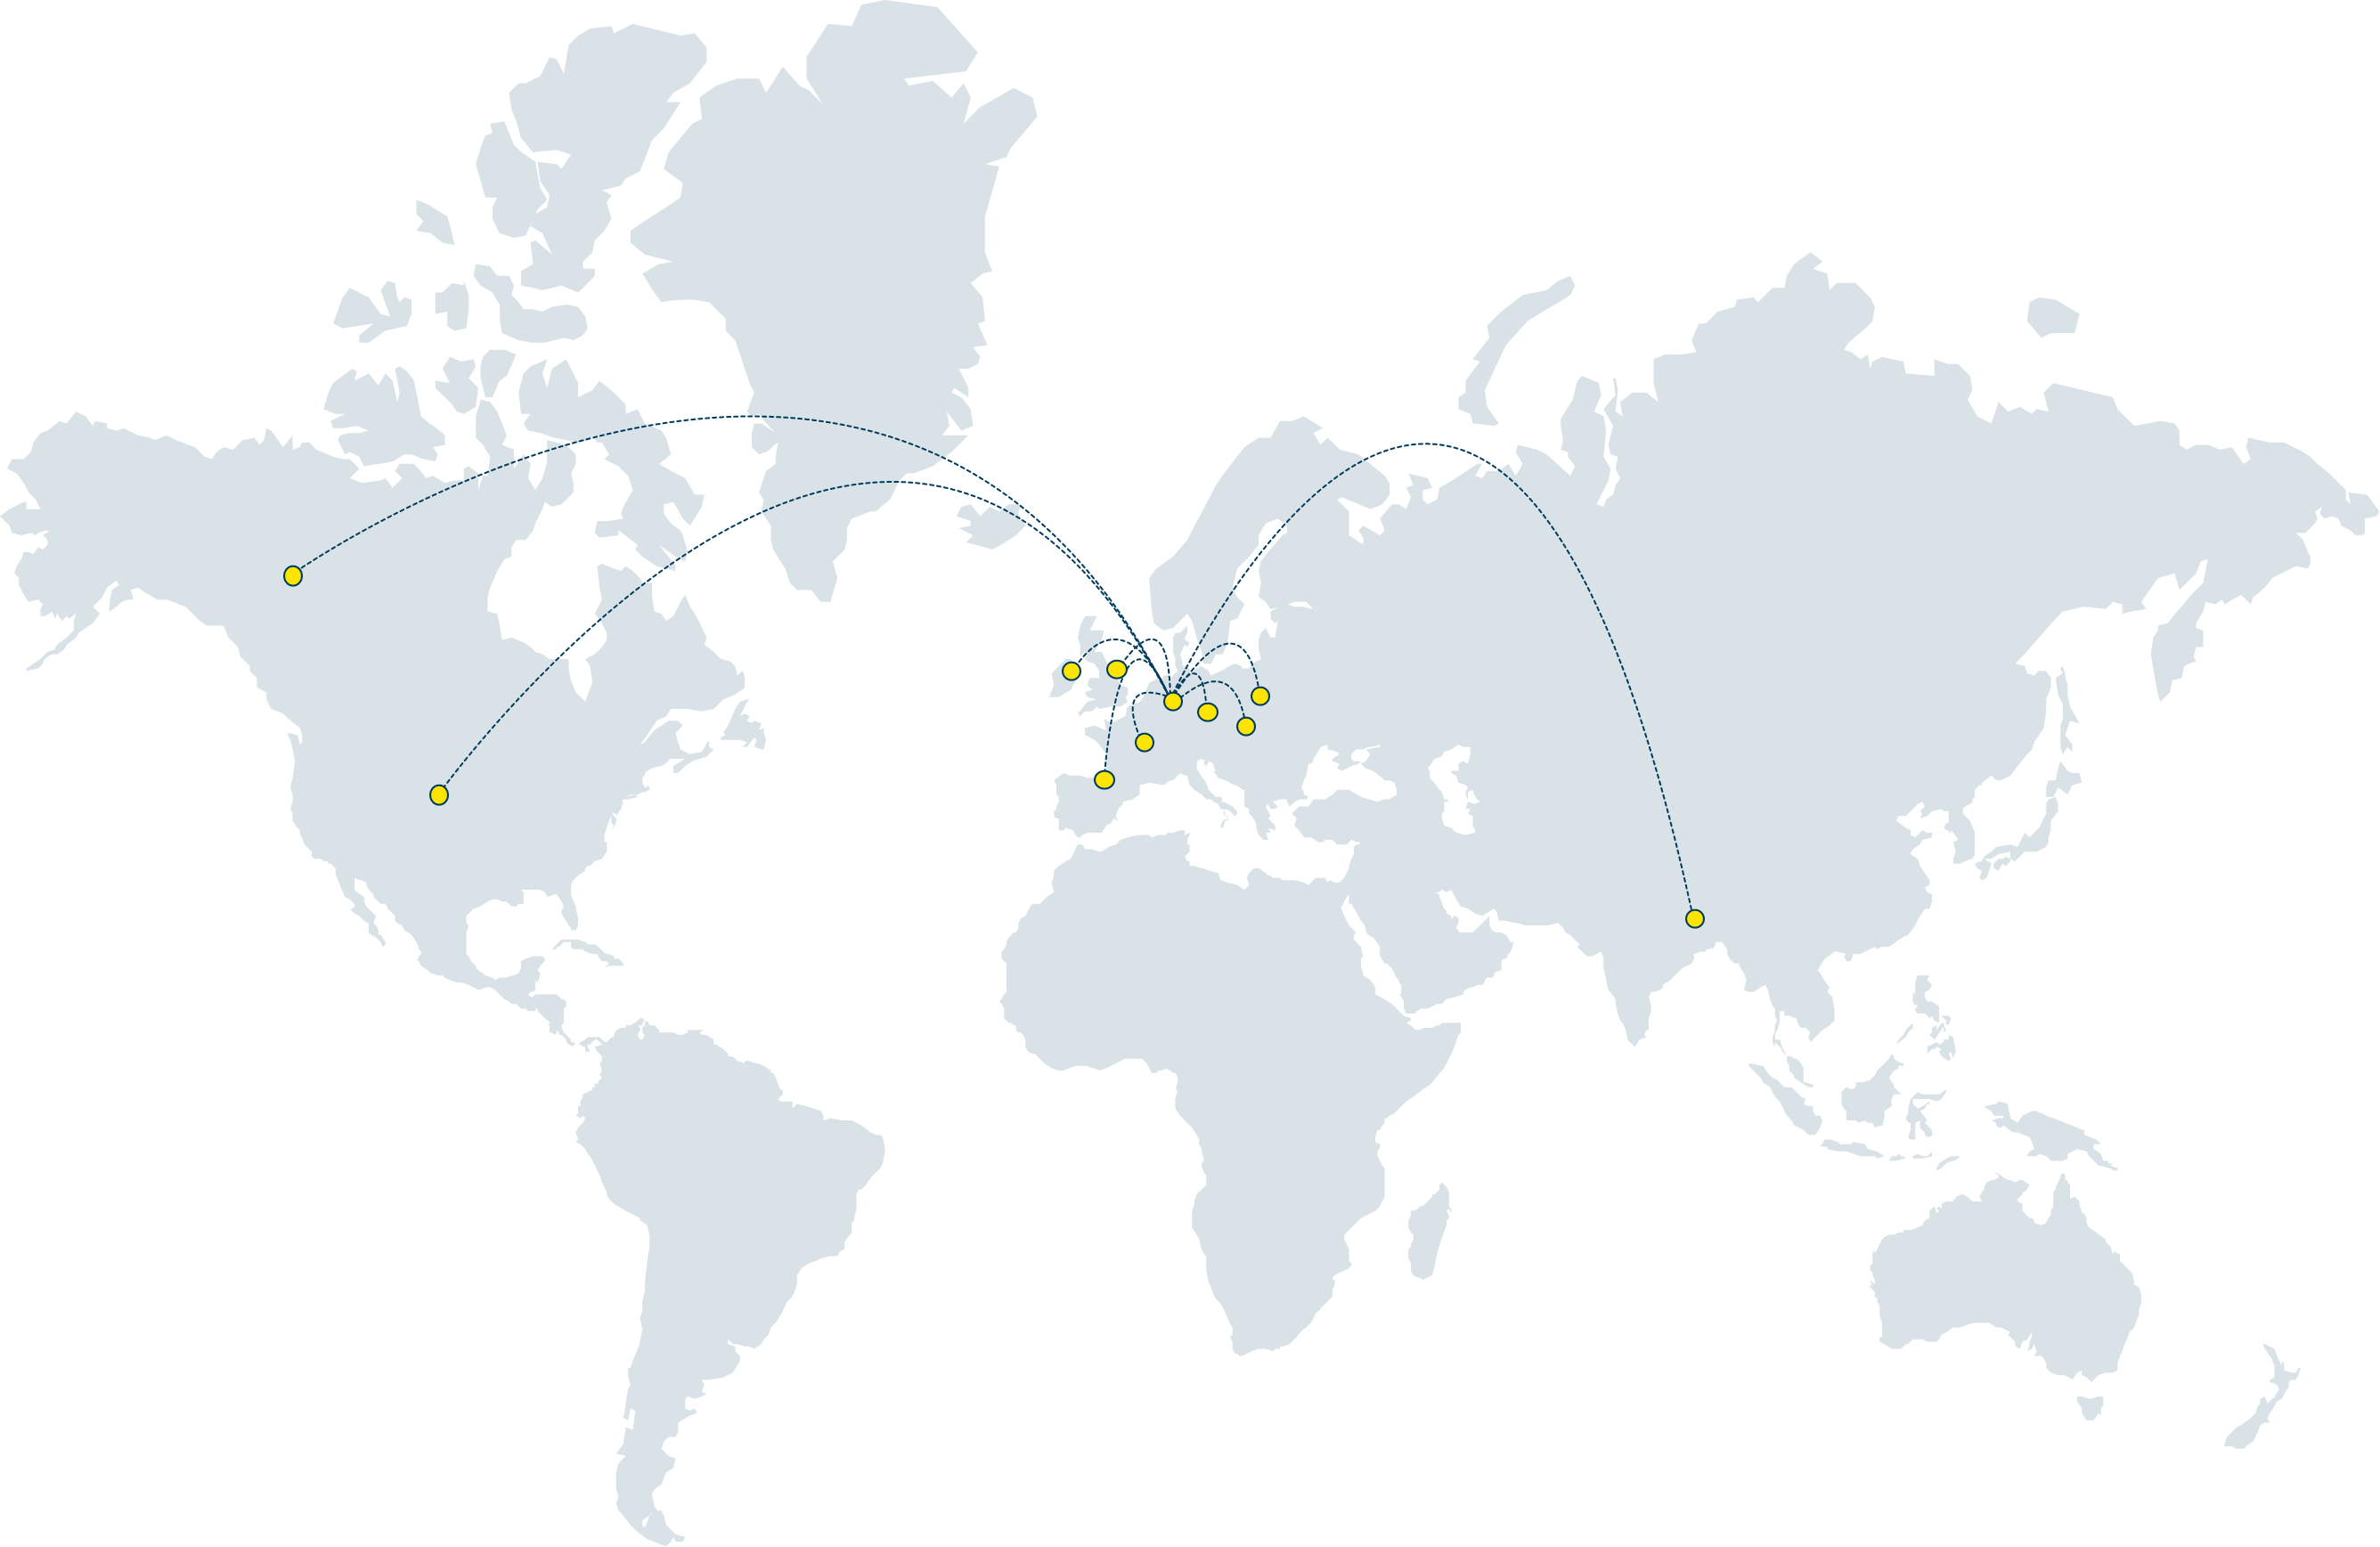 World map with visualisation of international collaborations